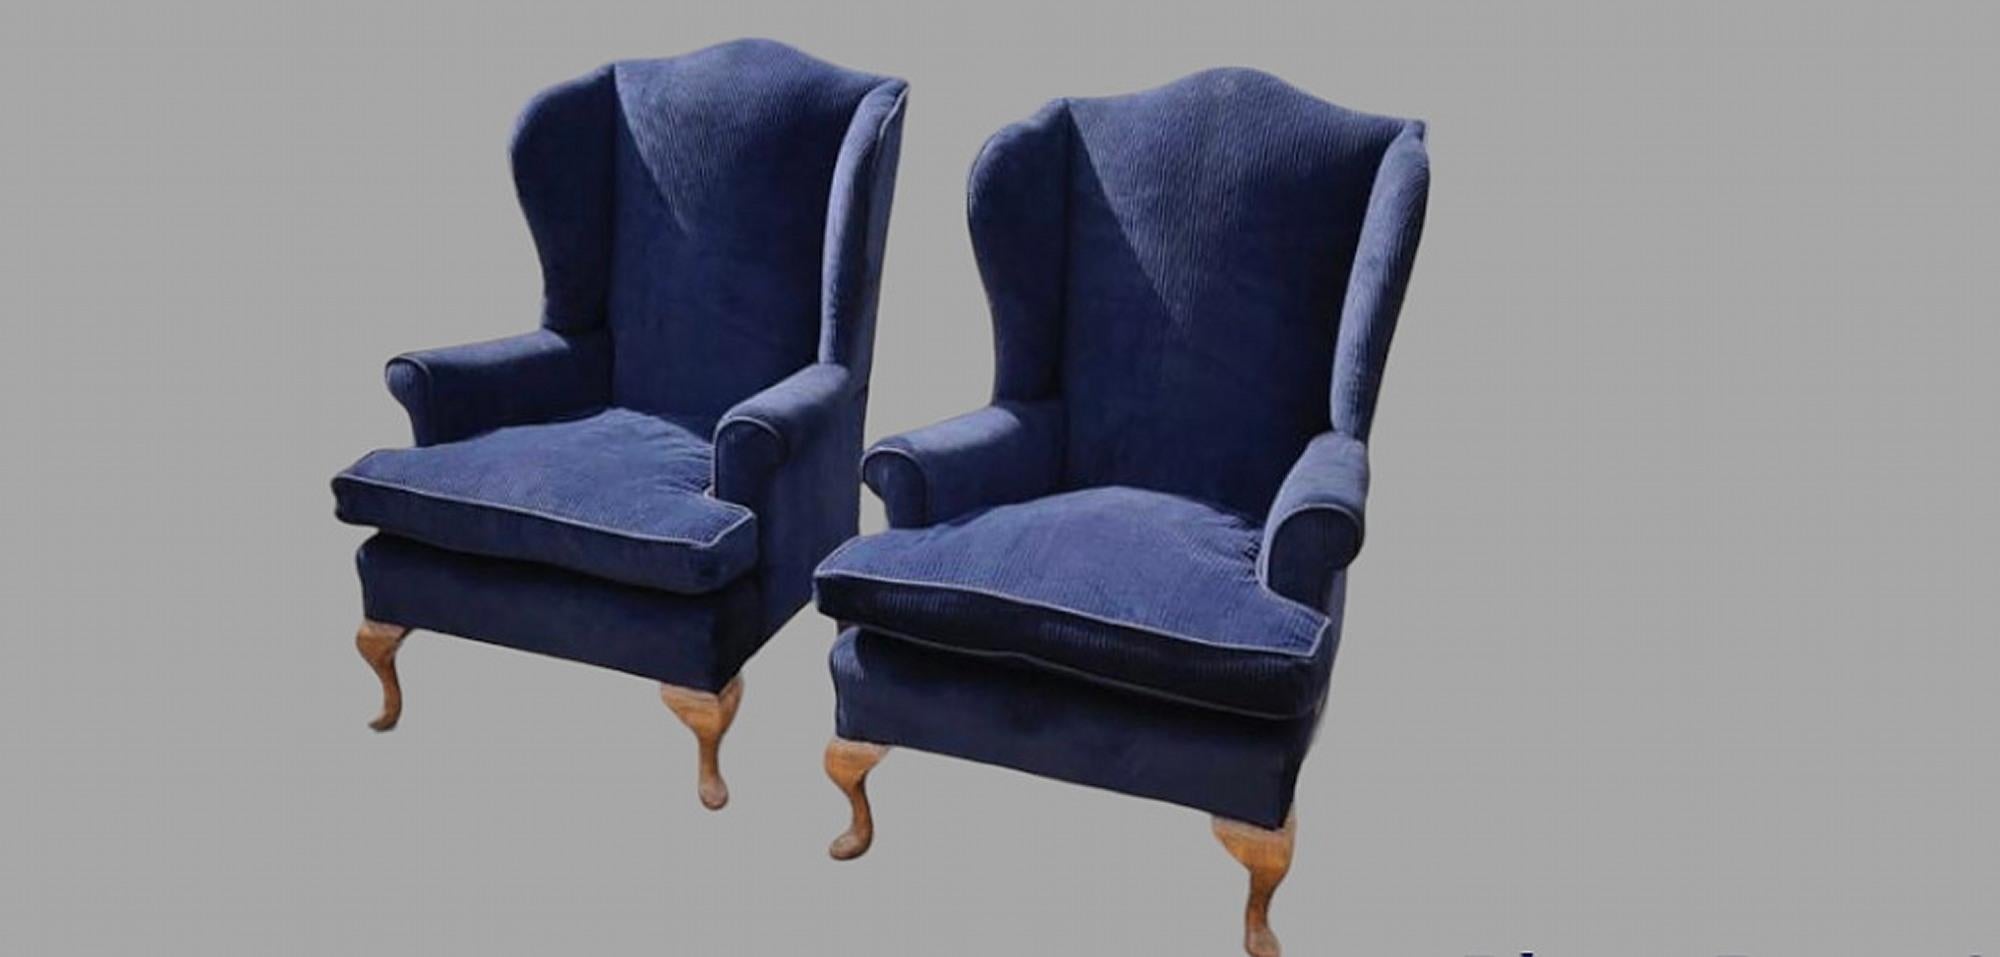 A Pair of Attractive c1950 Wingbacked Armchairs with cabriole legs re upholstered in French navy corduroy with linen trim. Seat Height 50 cm and Arm Height 63 cm.